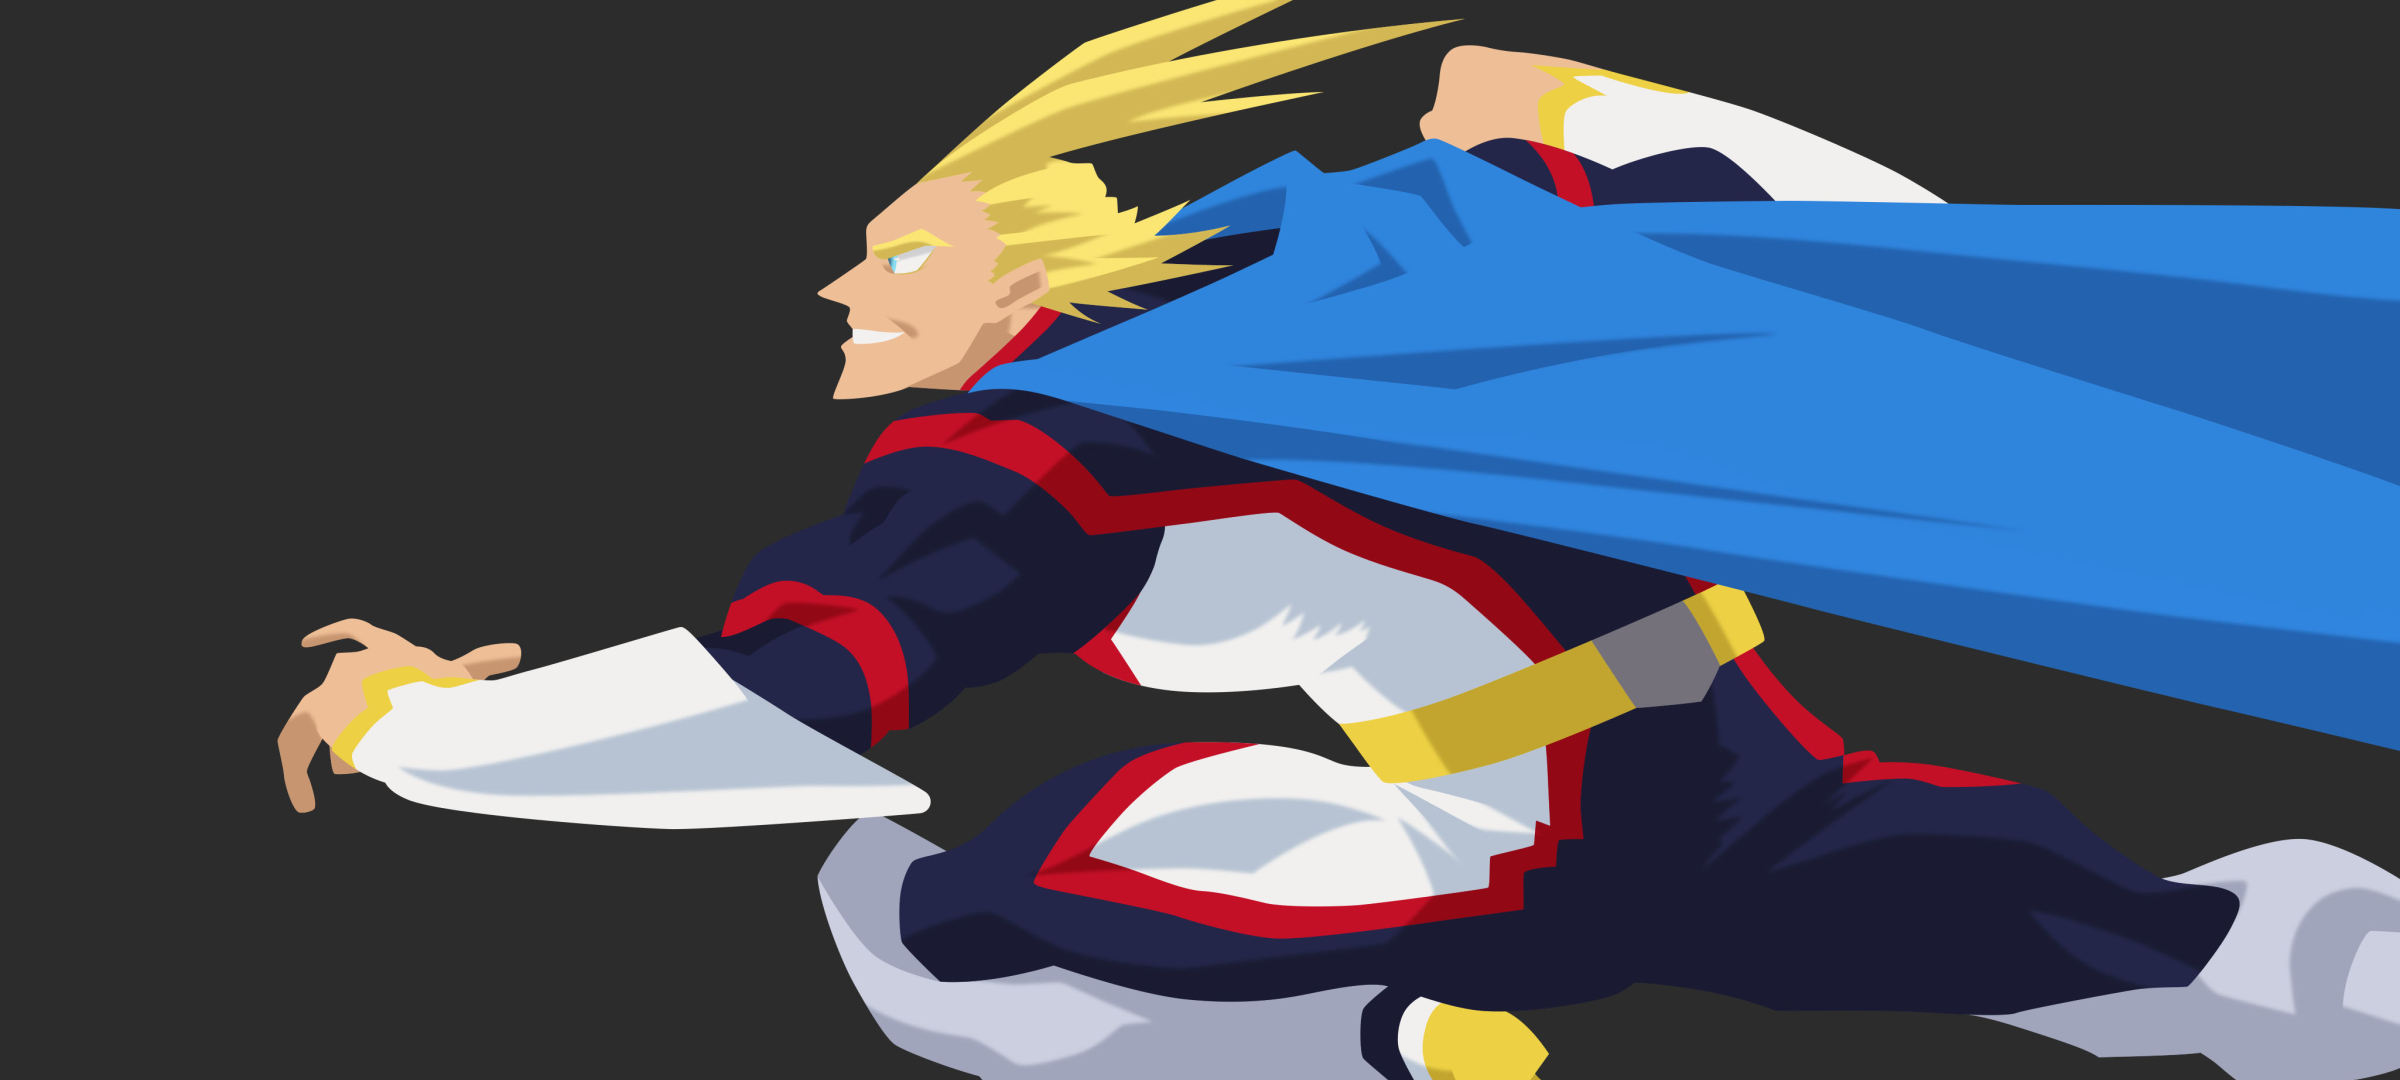 All might 1080P, 2K, 4K, 5K HD wallpapers free download | Wallpaper Flare